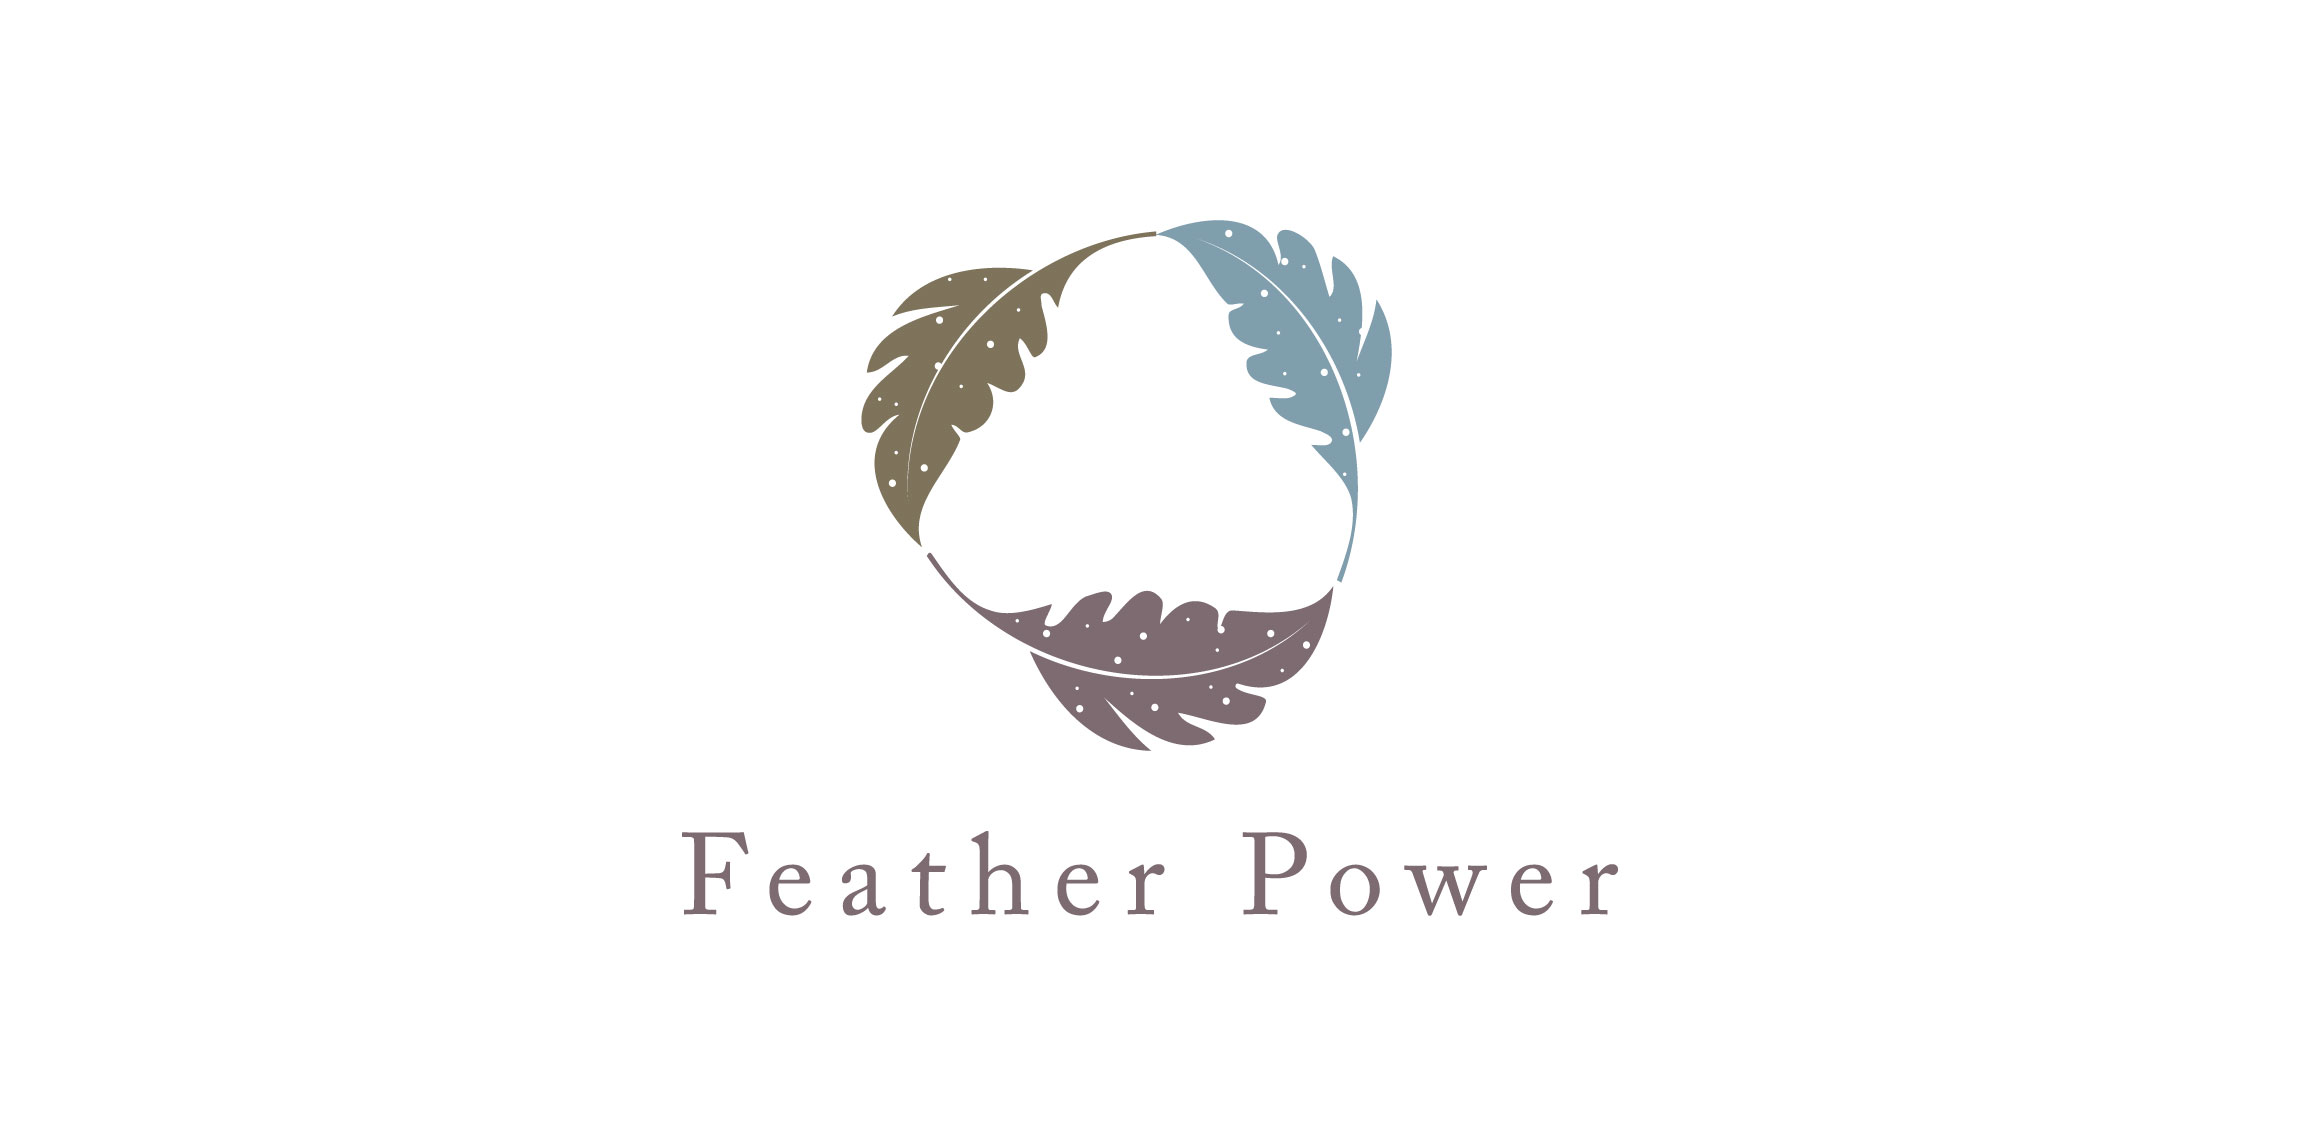 Feather Power